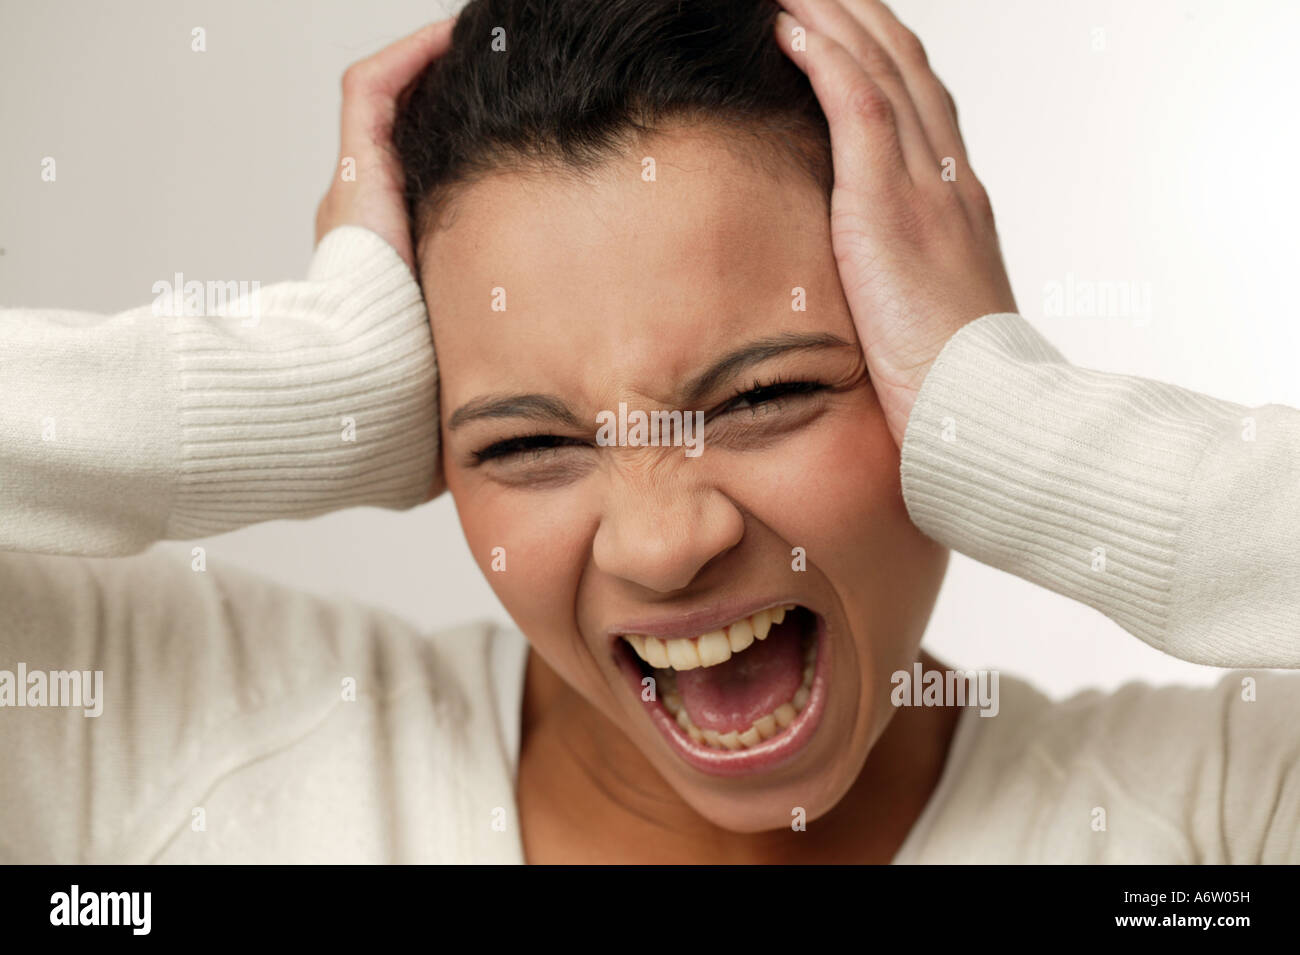 Screaming young girl holding her head with her hands Stock Photo